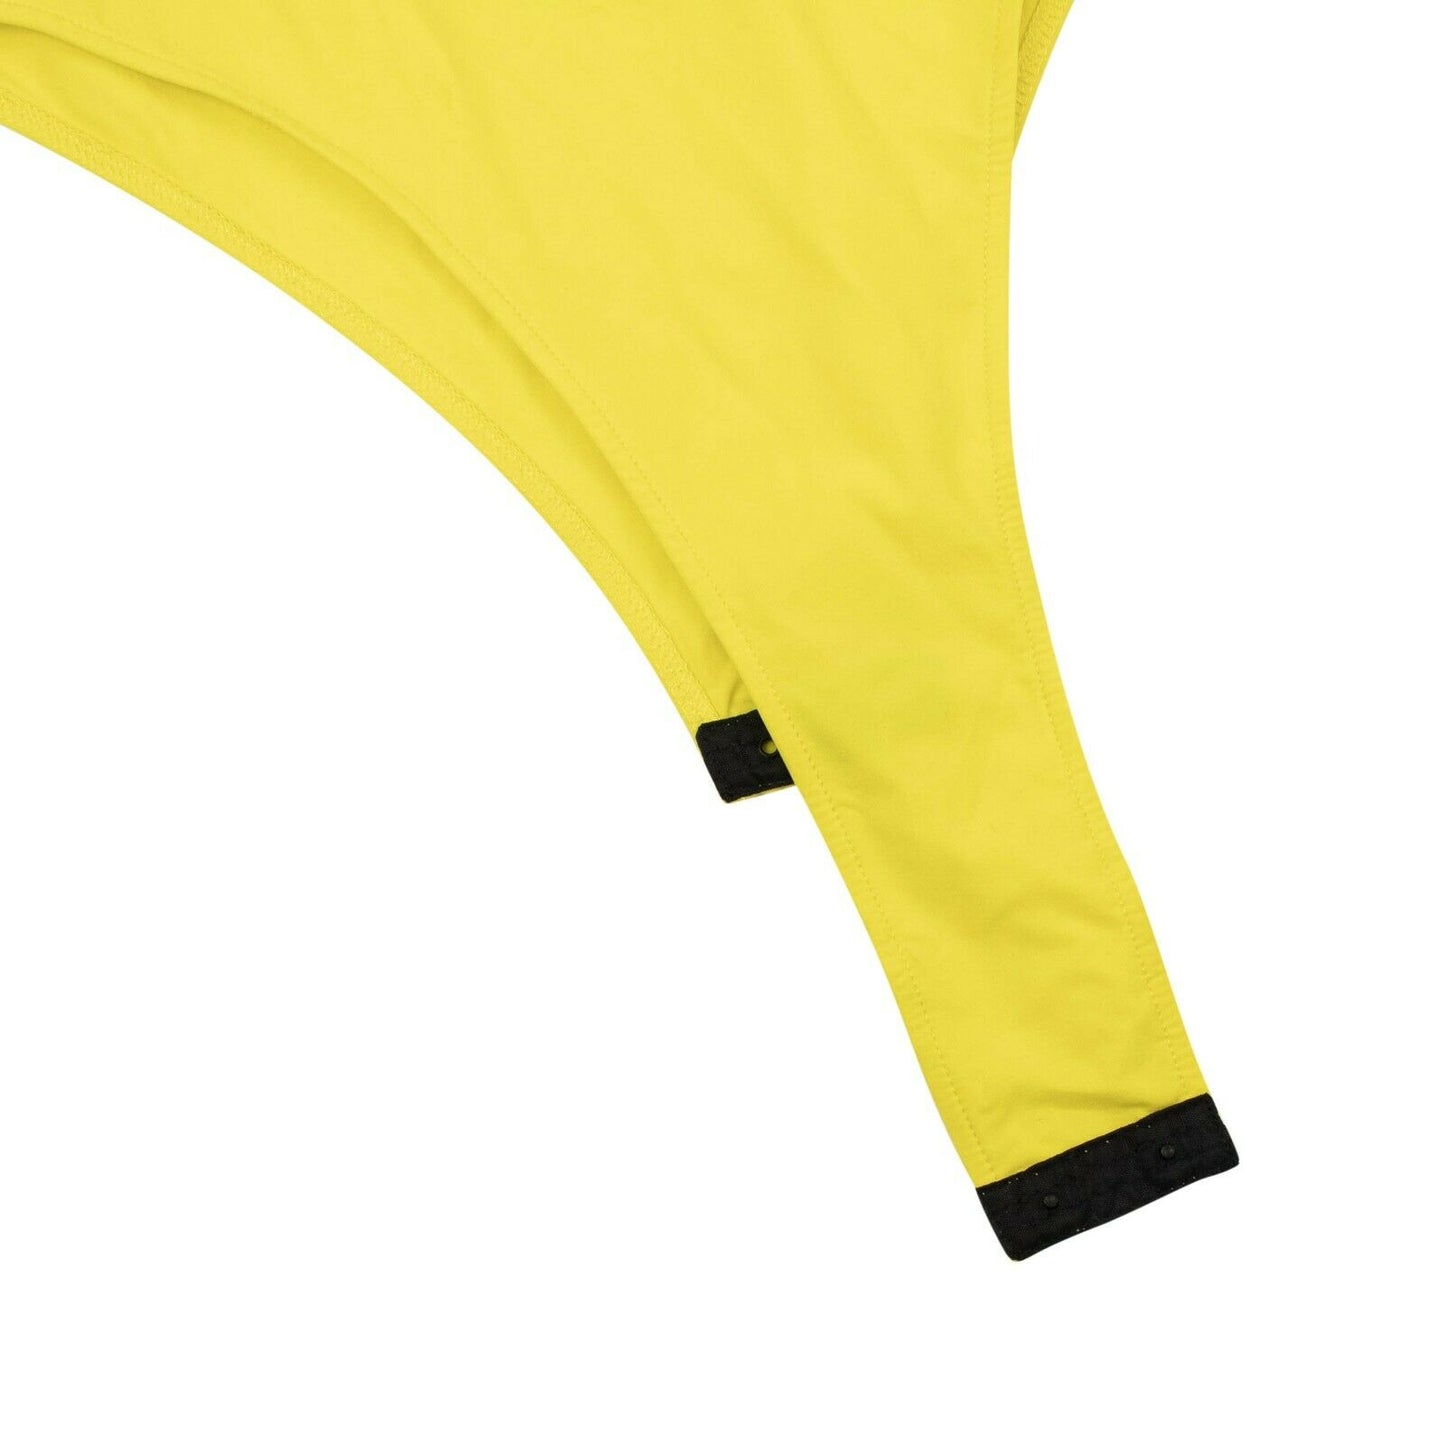 Unravel Project Cut-Out Bodysuit - Yellow